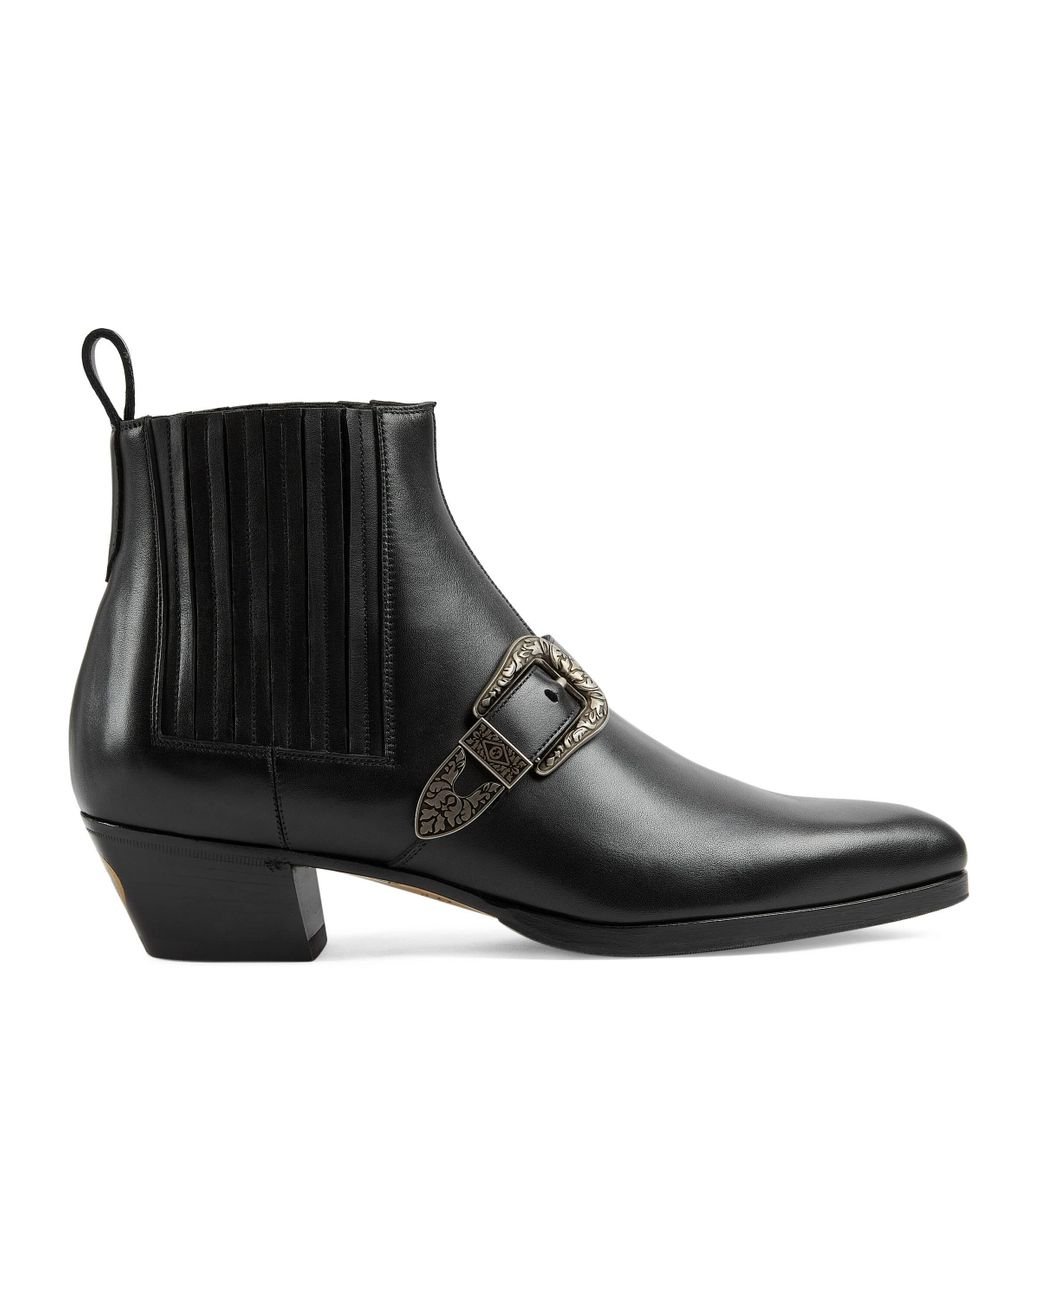 Gucci Leather Ankle Boot With Buckle in Black for Men - Lyst